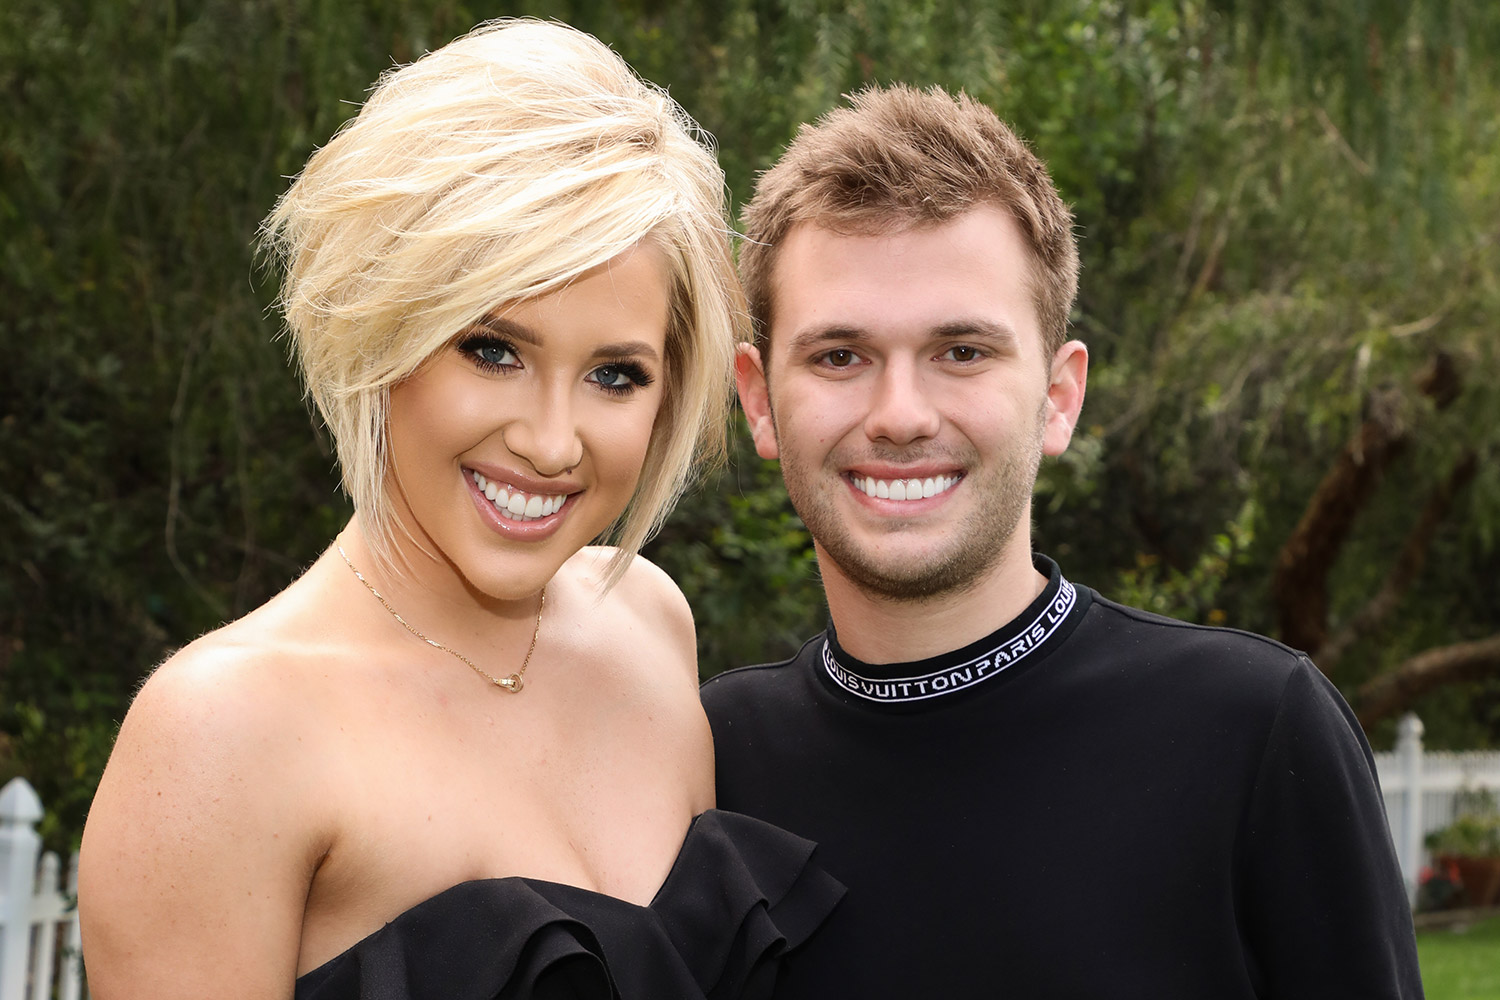 Chrisley Knows Best Star Chase Chrisley Gives His Sister Savannah Serious Side Eye! Here’s Why